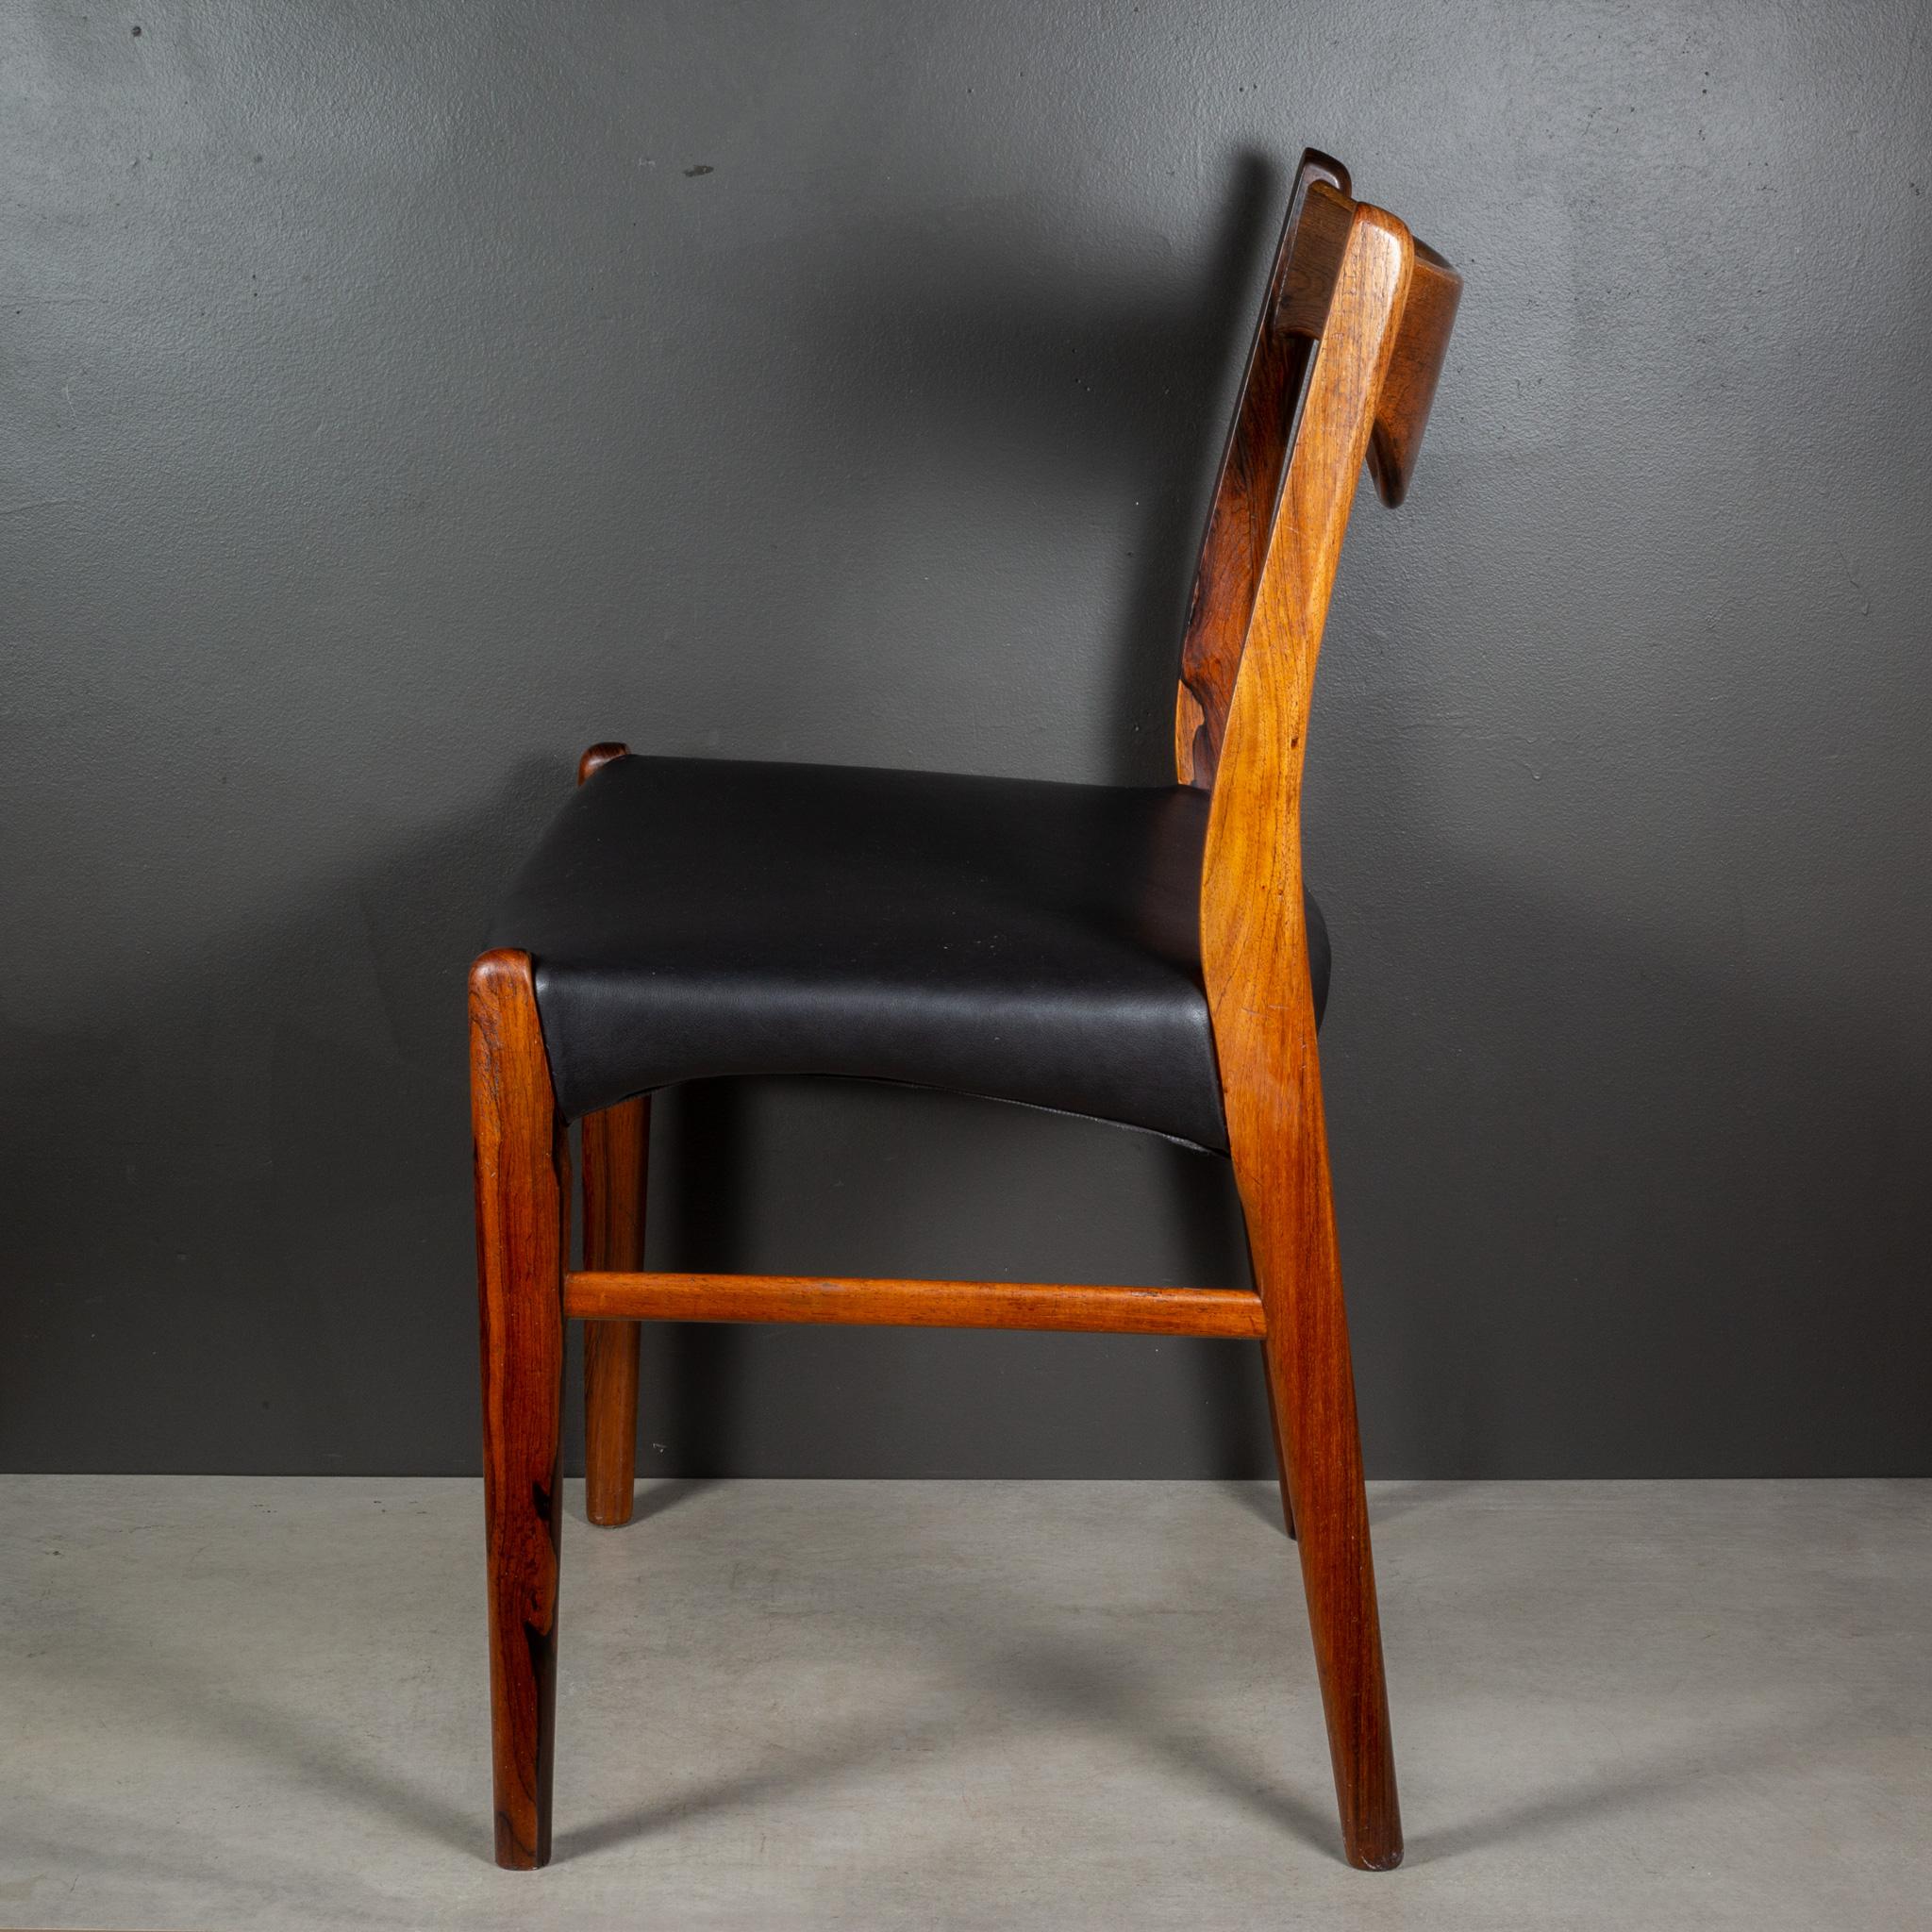 Danish Arne Wahl Iversen Model GS61 Rosewood and Leather Dining Chairs c.1950 For Sale